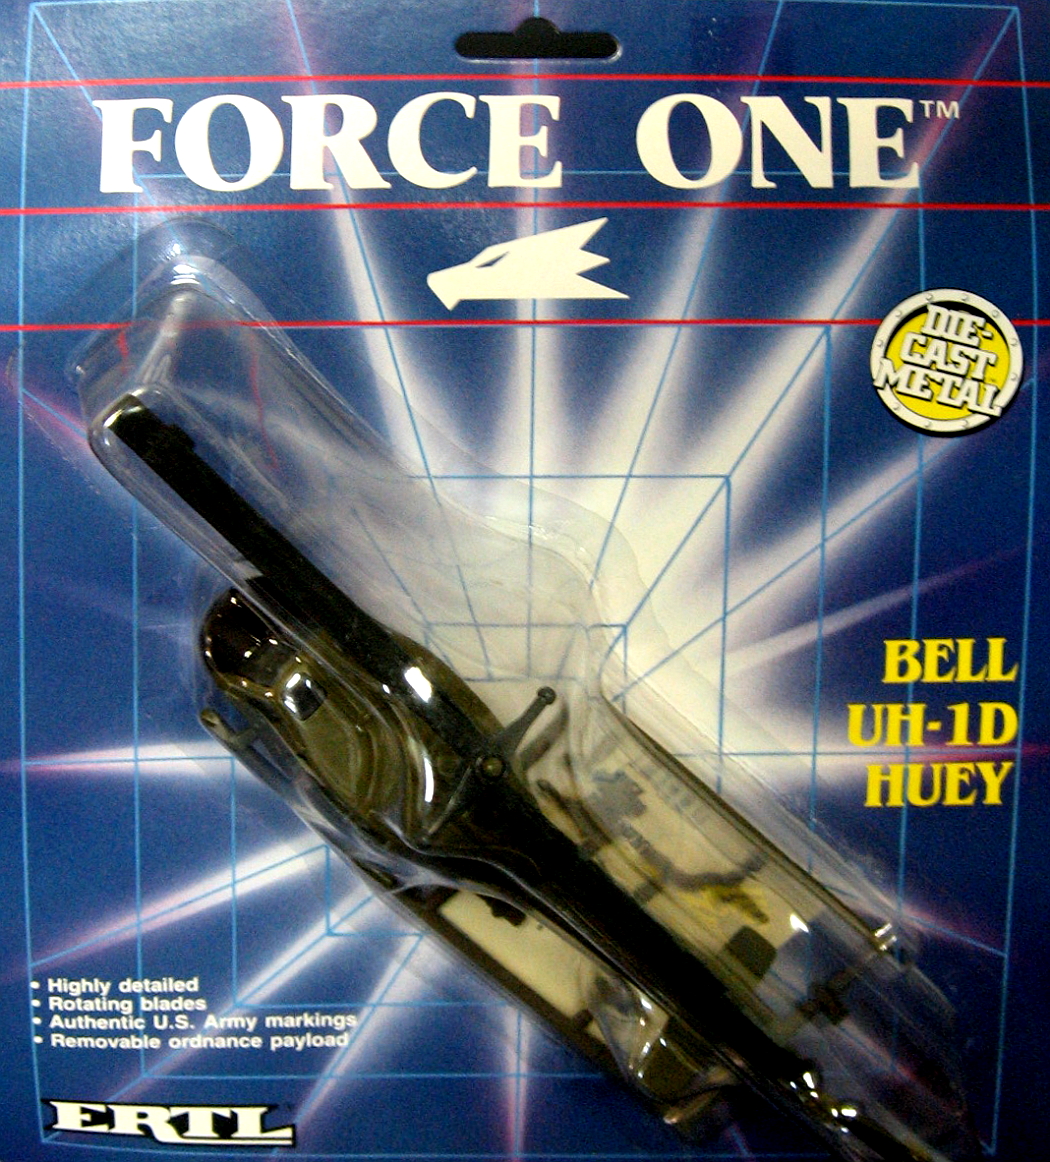 Force One "Bell UH-1D Huey" Helicopter (Ertl) *SOLD*